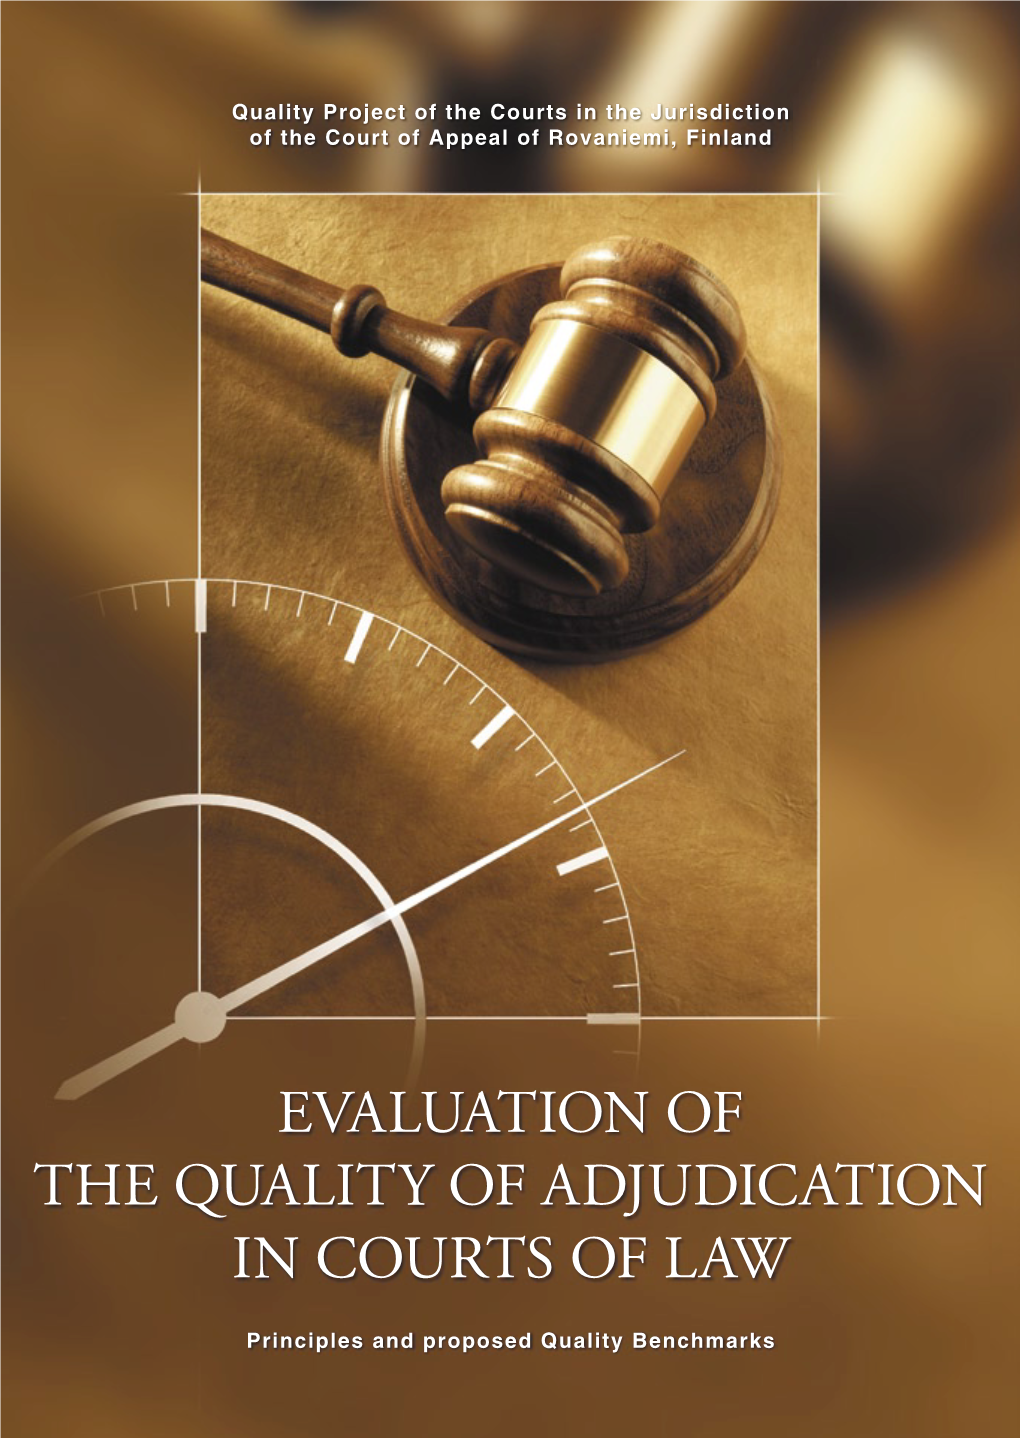 Evaluation of the Quality of Adjudication in Courts of Law